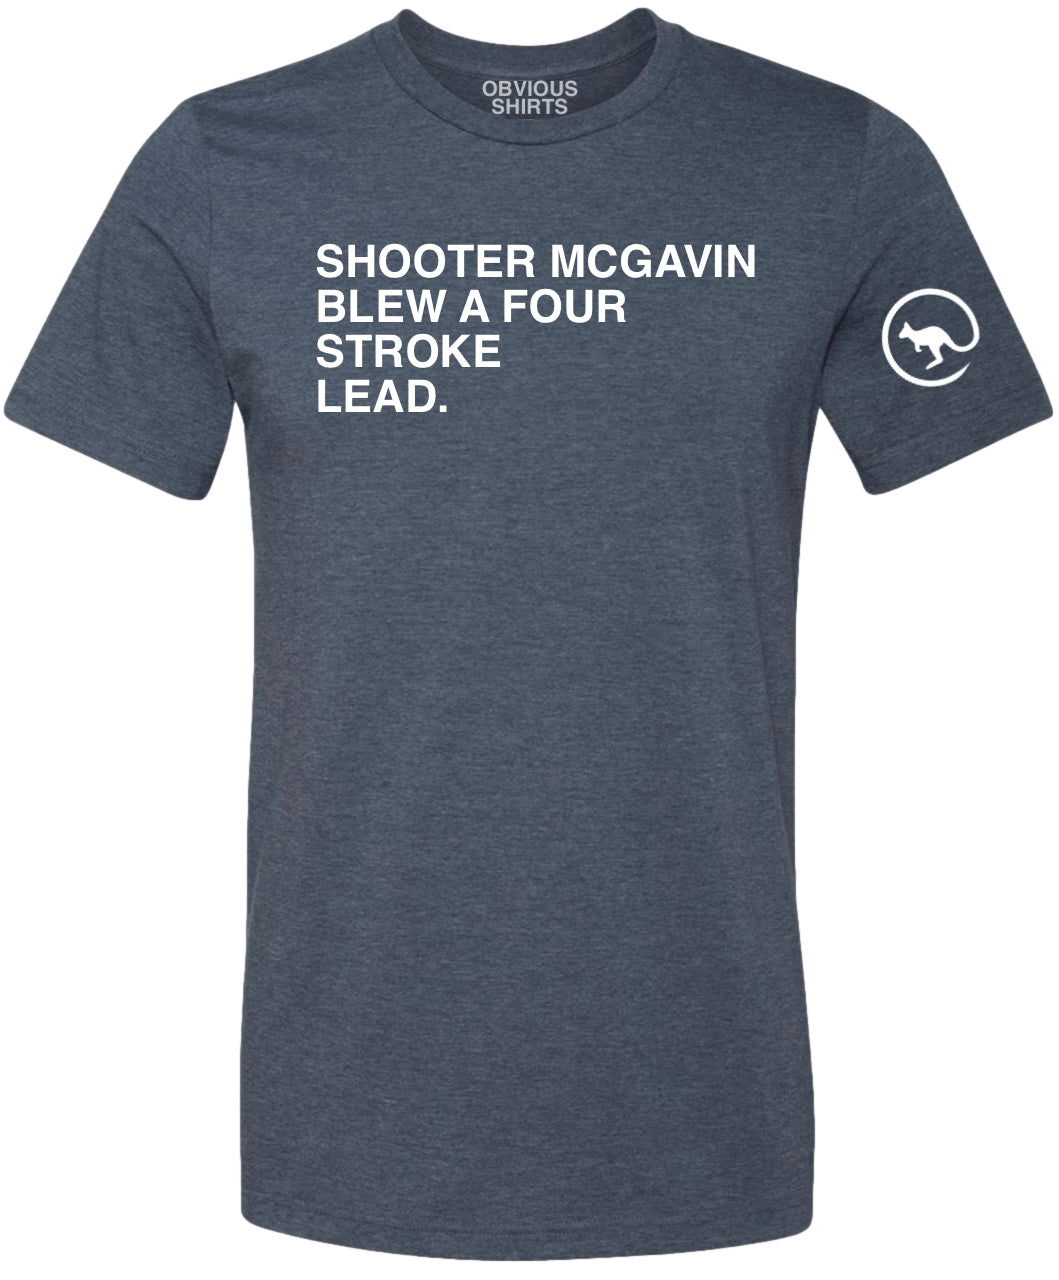 SHOOTER BLEW A FOUR STROKE LEAD (NAVY) - OBVIOUS SHIRTS